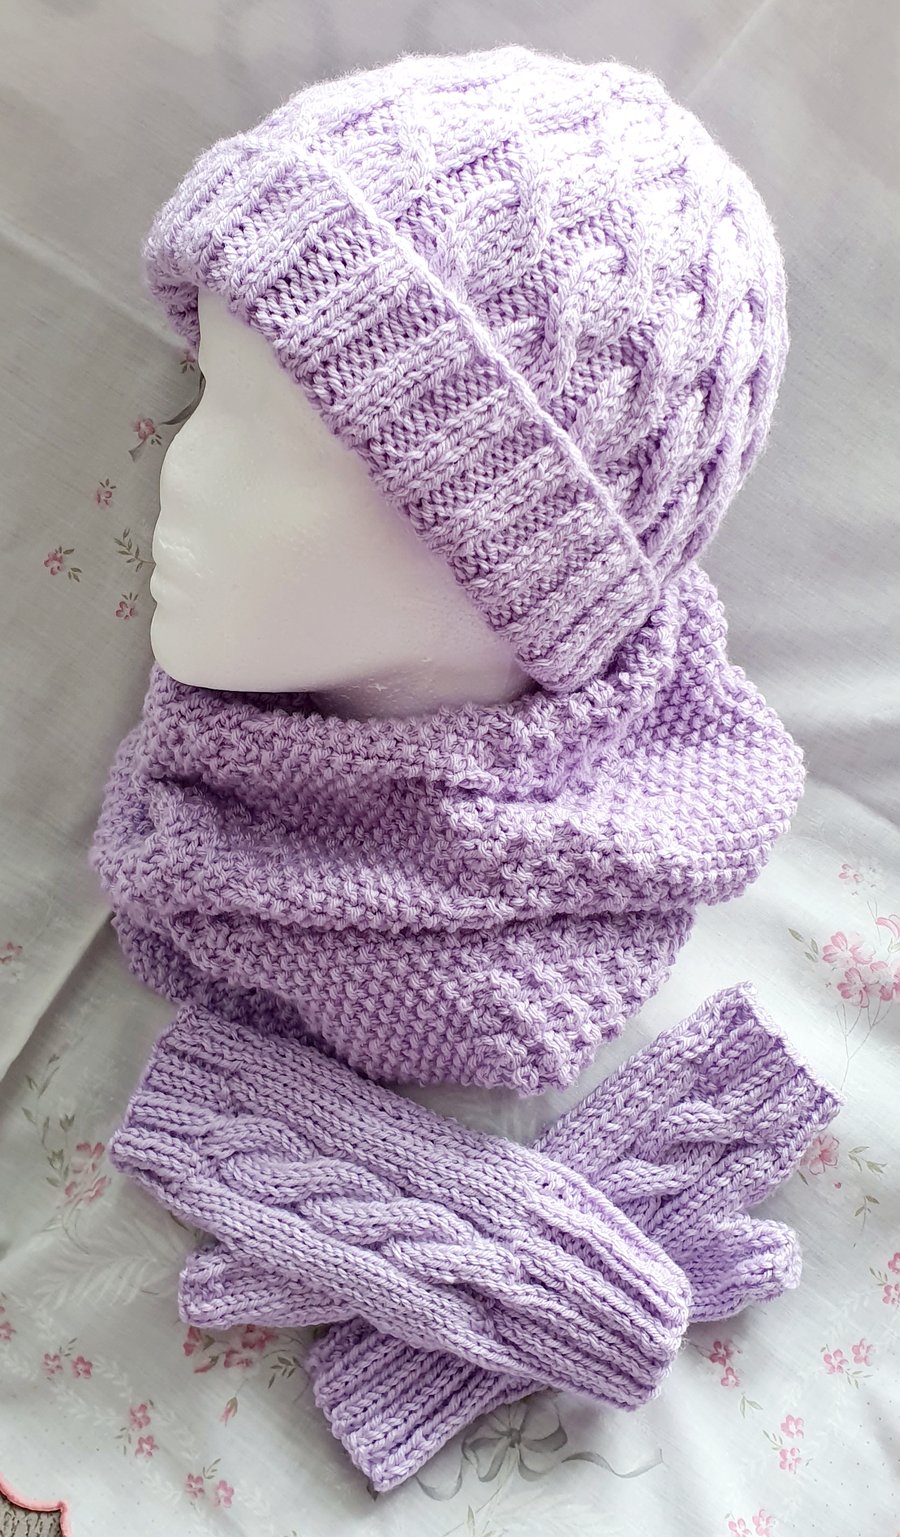 Lilac hand-knitted Aran Cable matching set, hat, cowl & fingerless mitts